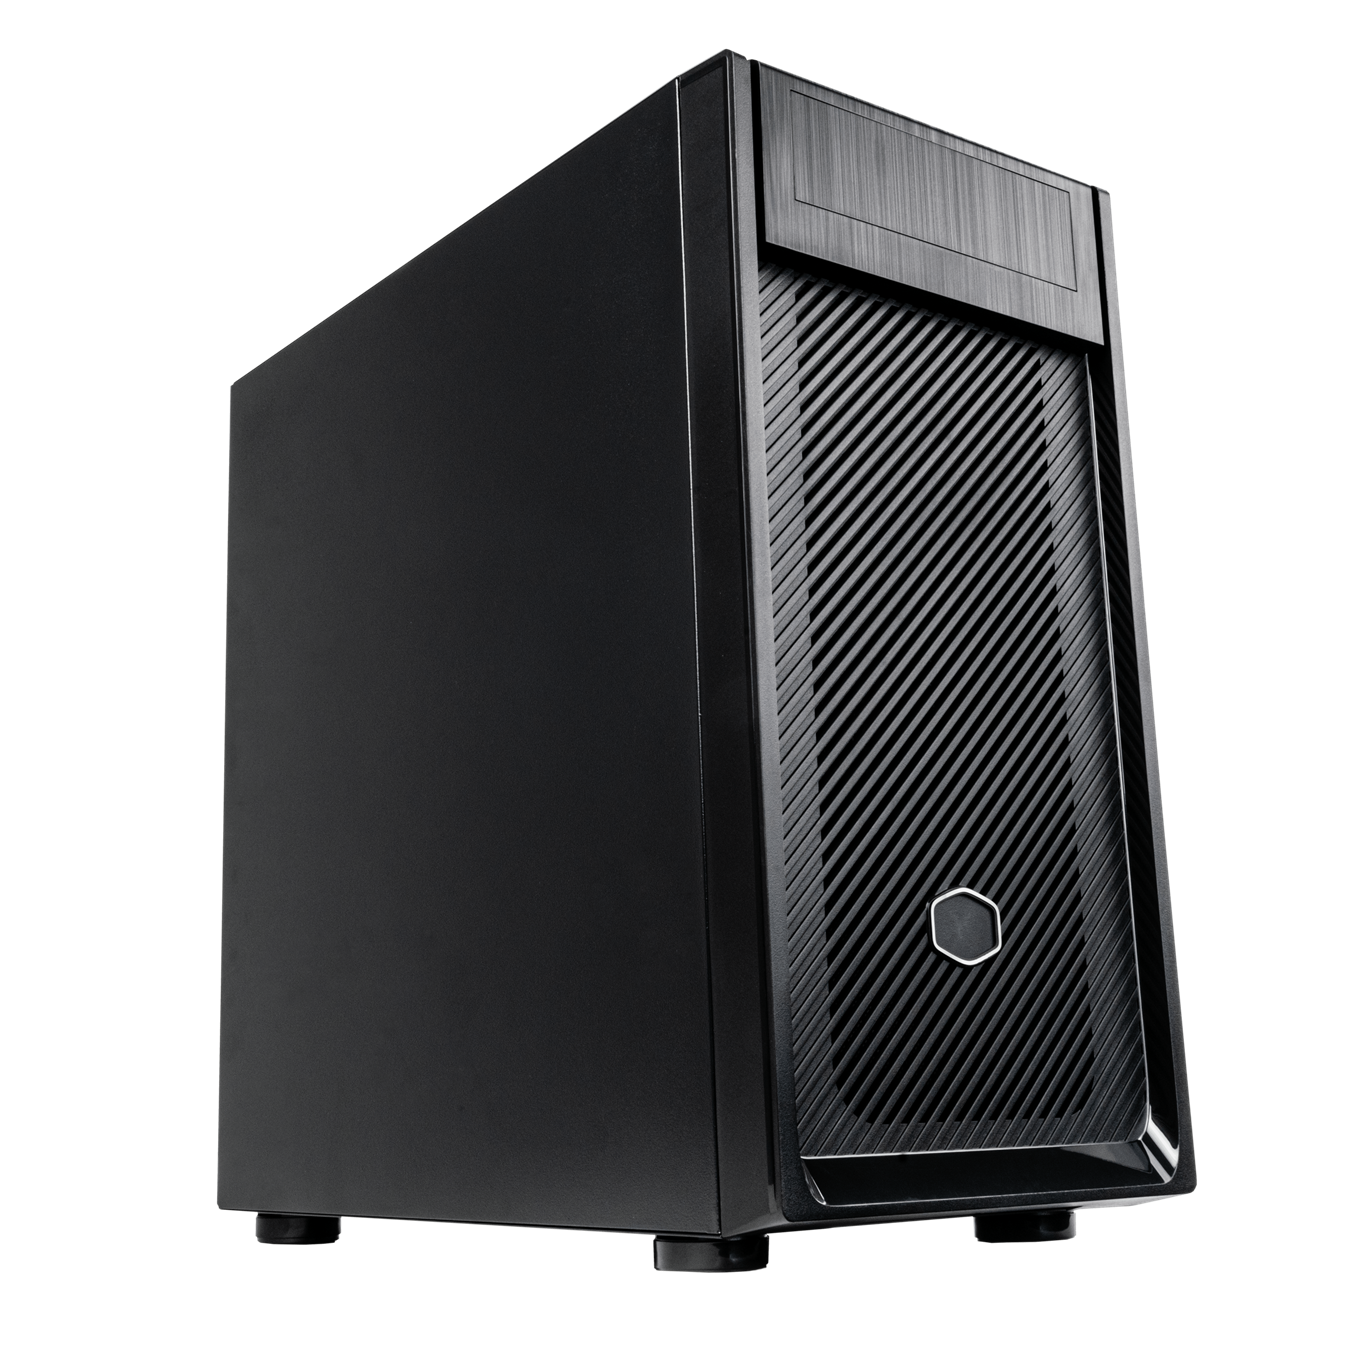 Ready To GO Home & Office PC (OP-S03934) i3-14100, 8GB RAM, 500GB SSD, Wi-Fi and Bluetooth, Win 11 Home, 1Y Warranty